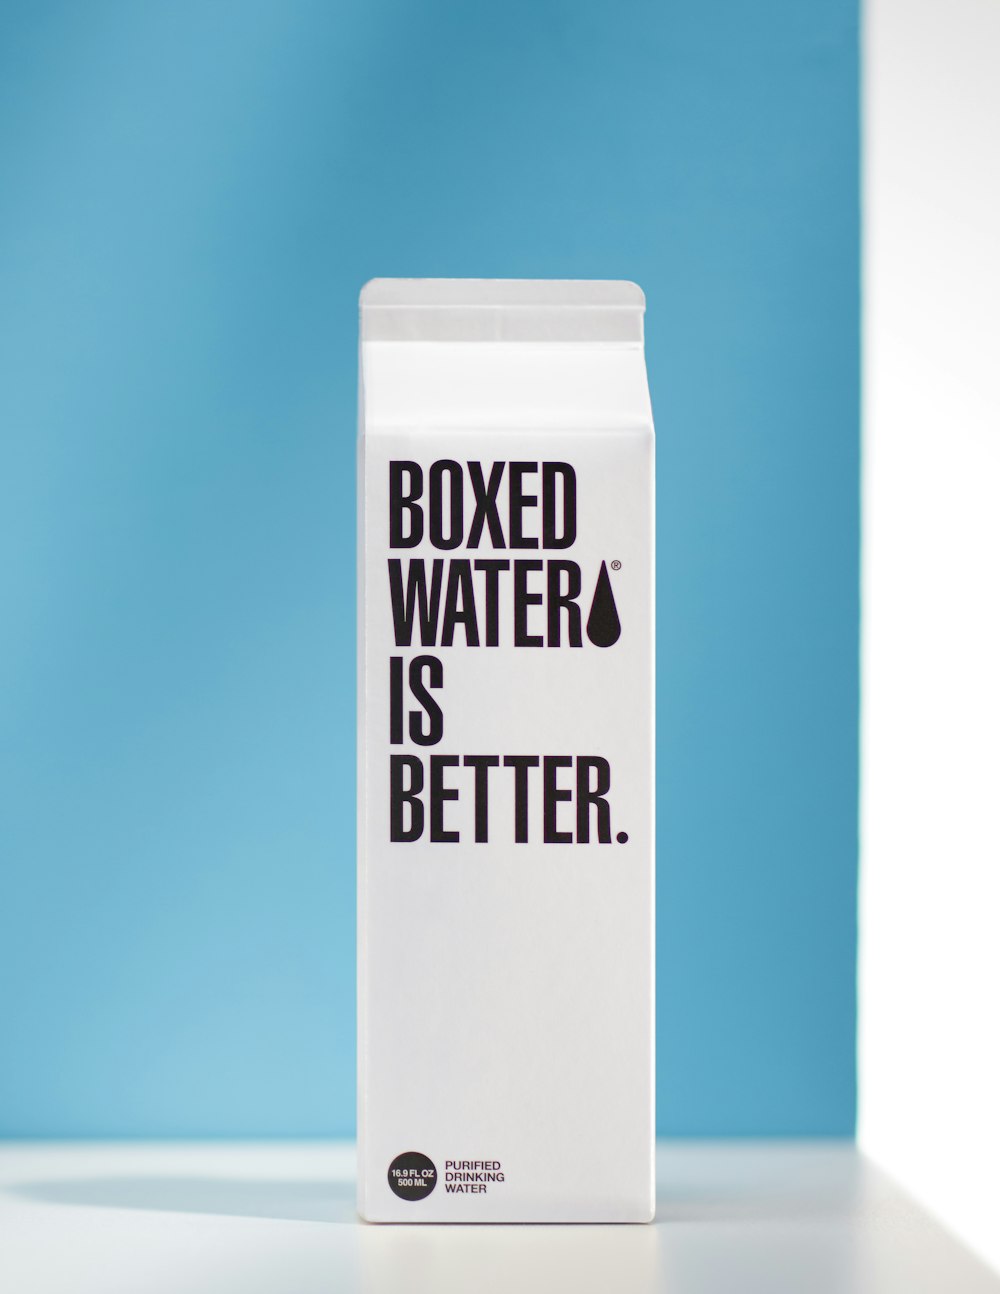 A Boxed Water carton labeled with Boxed Water is Better